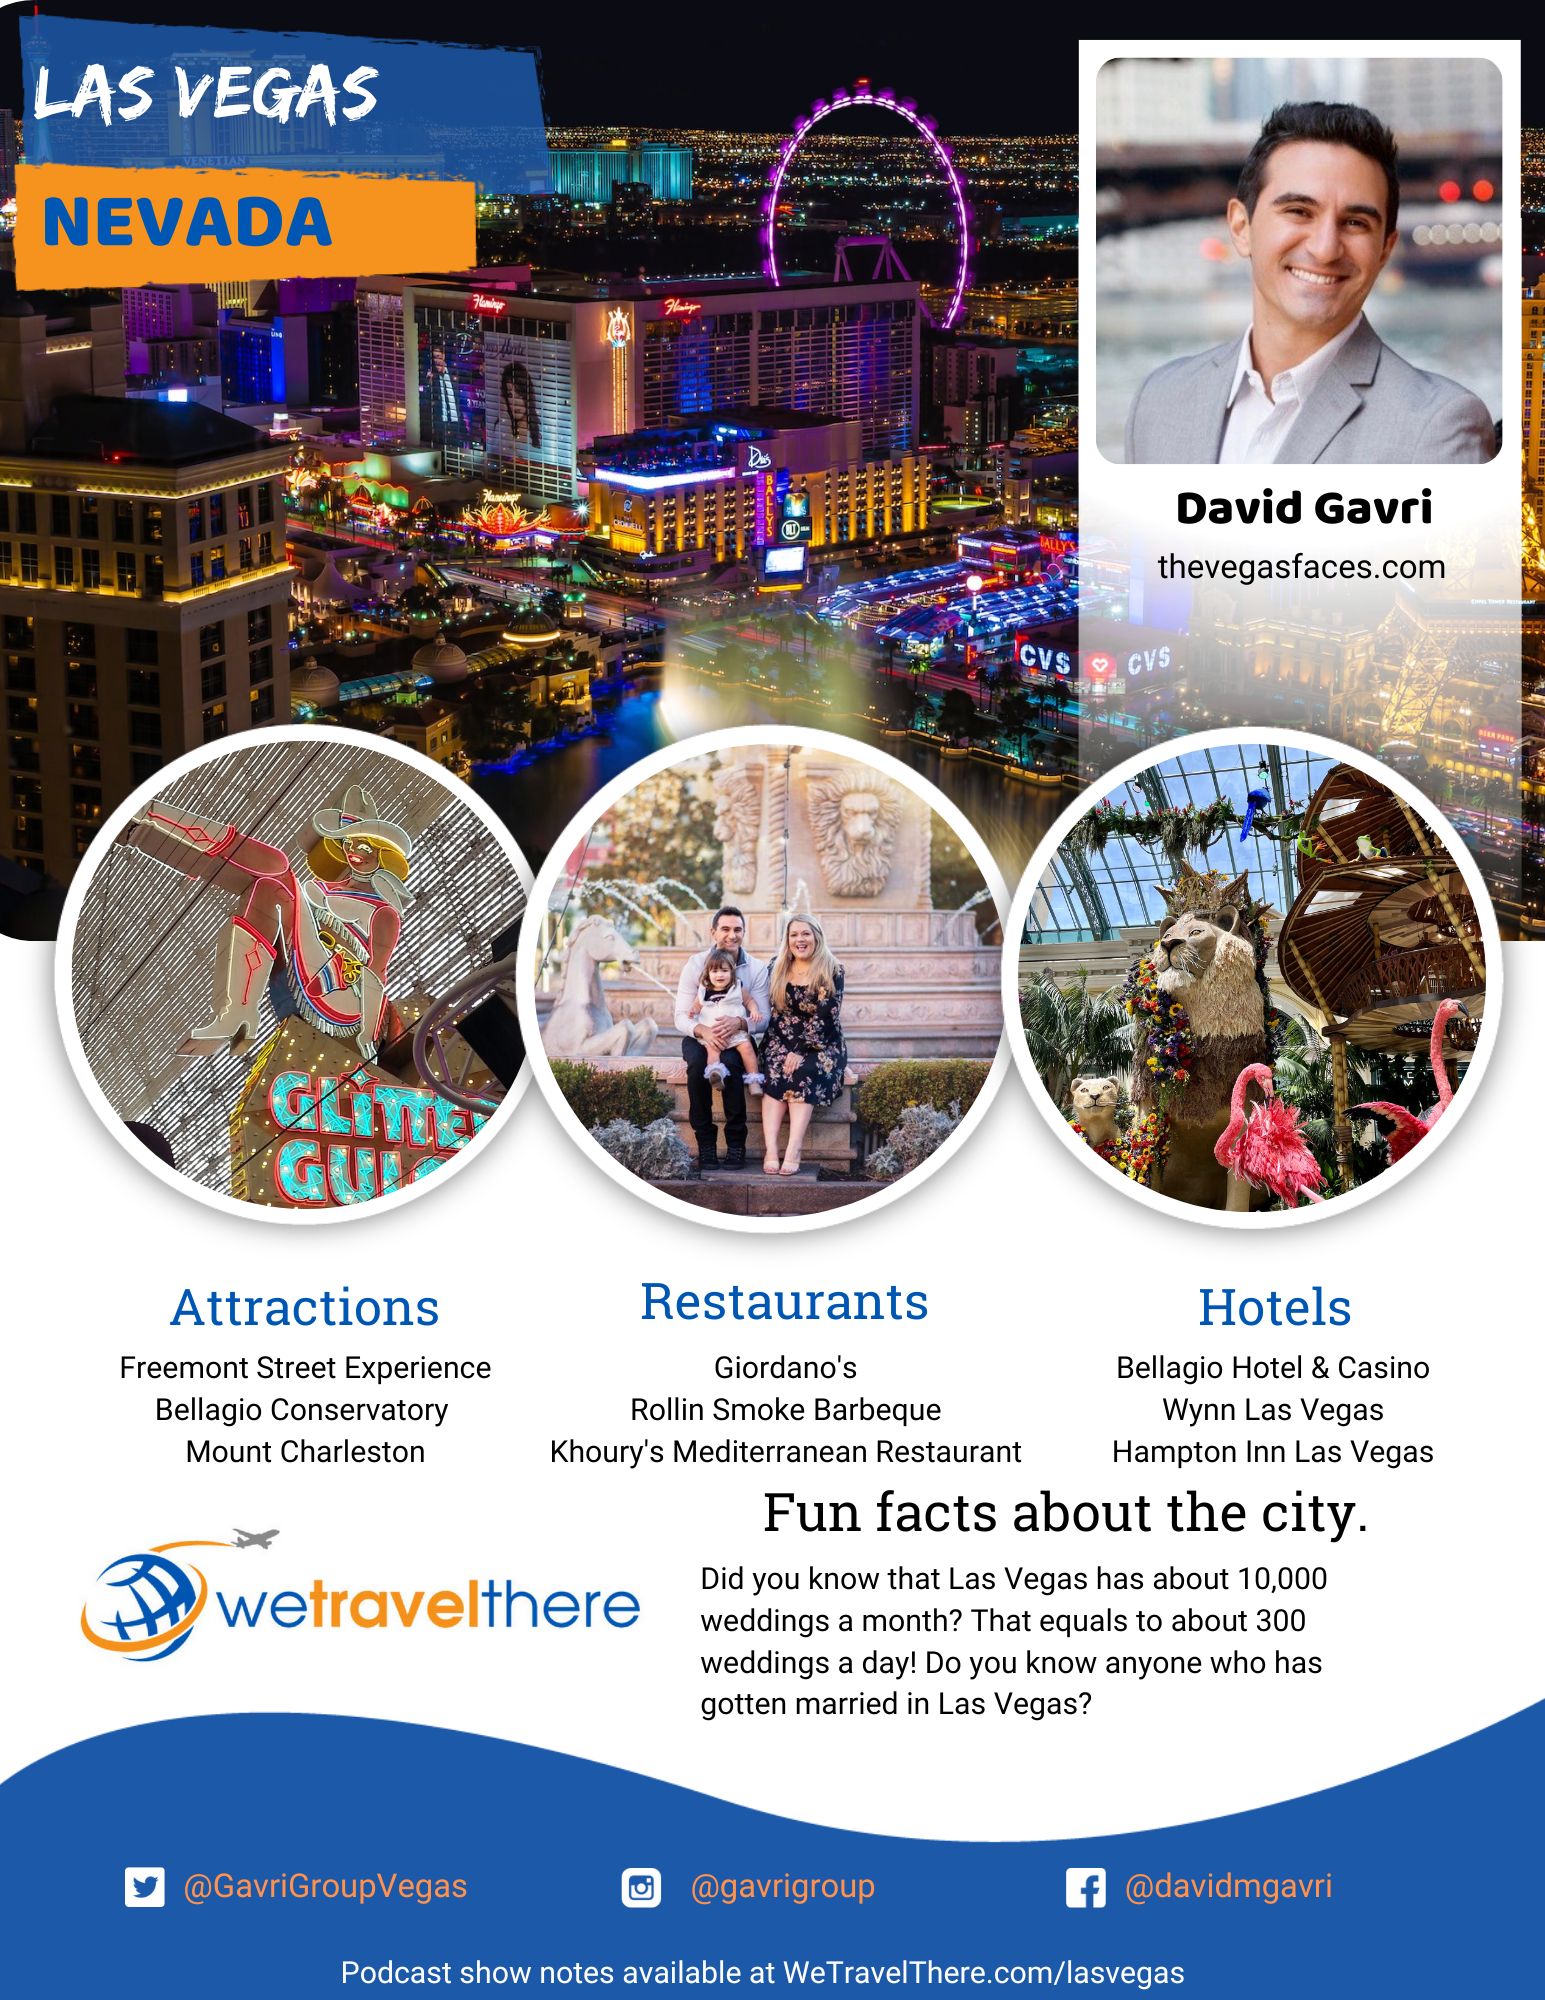 Vegas Faces’ David Gavri Is A Guest On The “We Travel There” Podcast!